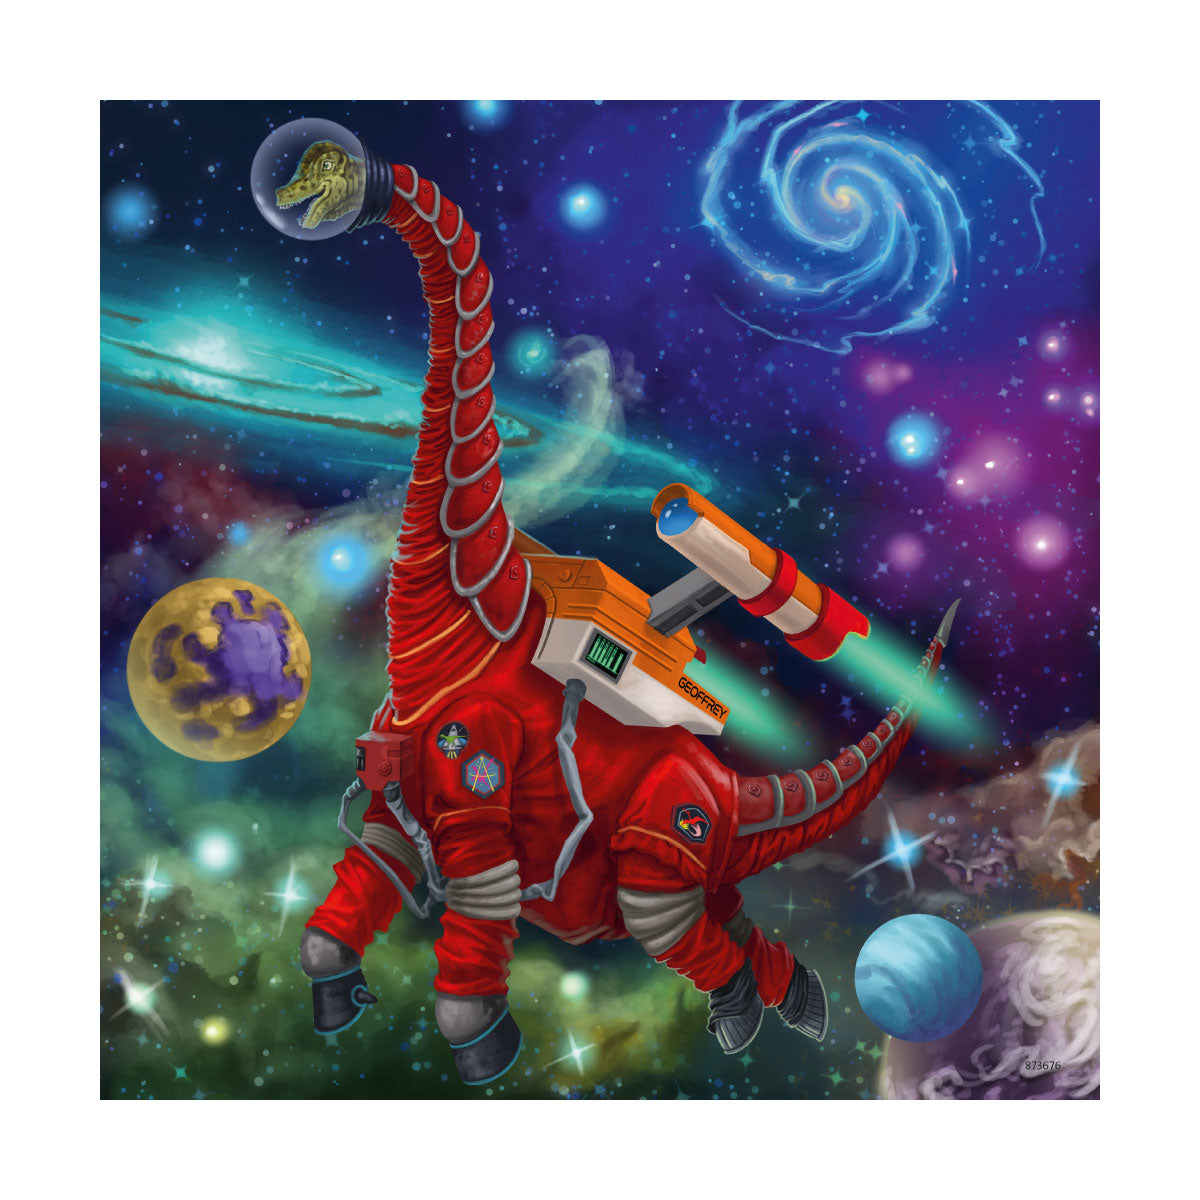 Dinosaurs in Space 3 x 49pc Jigsaw Puzzles from Ravensburger